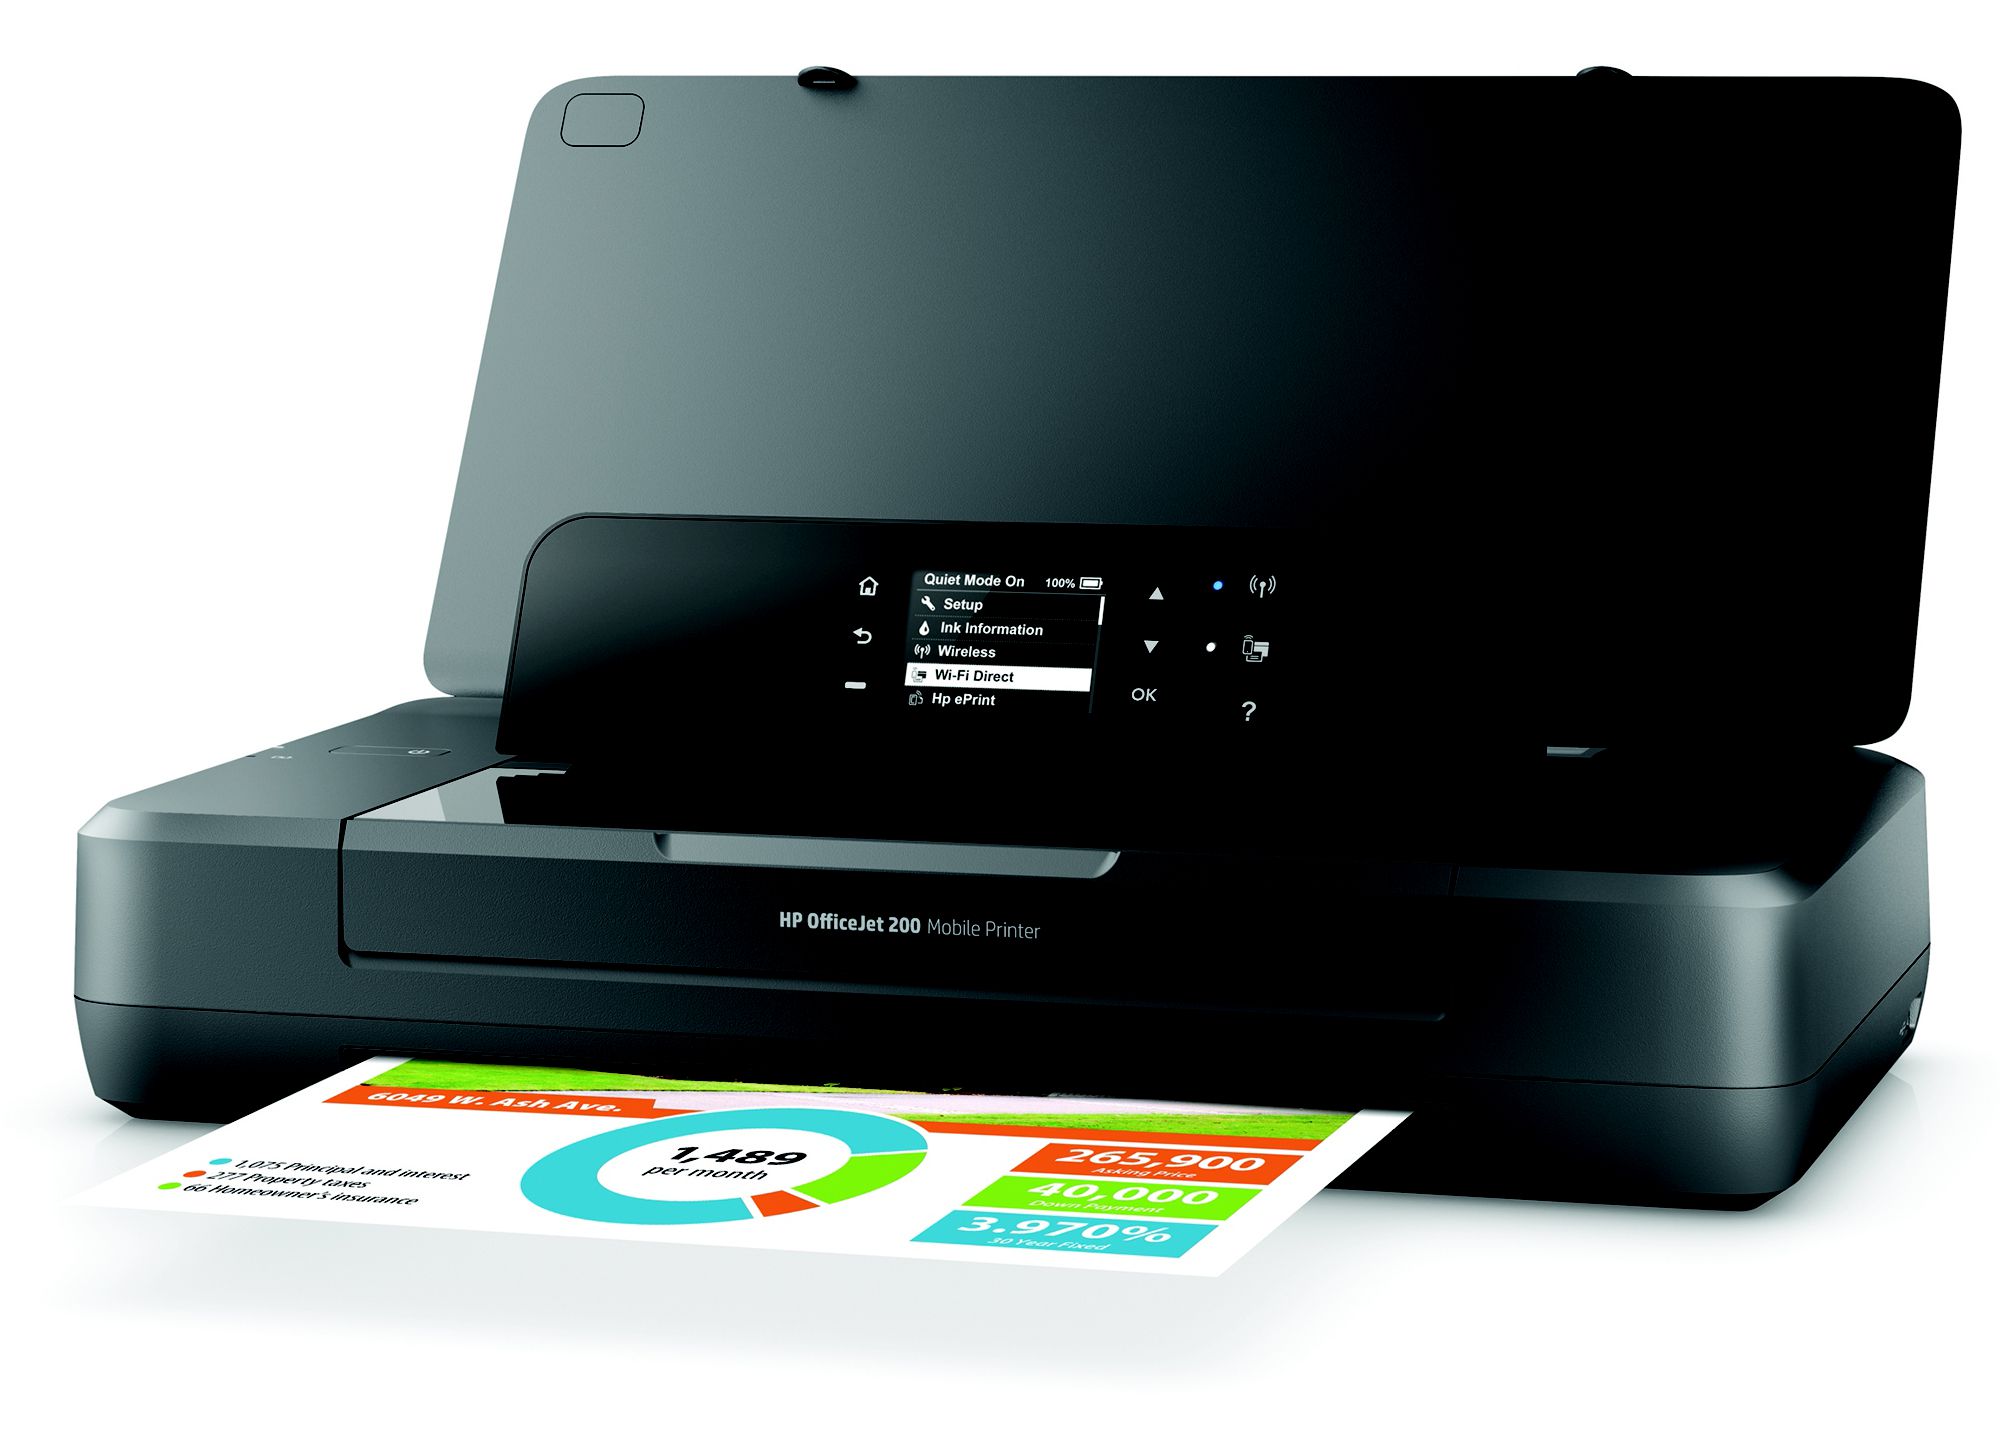 Hp Officejet 200 Mobile Printer Drivers : HP OfficeJet 200 Portable Mobile Wireless Printer Includes ... / Home > hp drivers > hp officejet 200 mobile printer series drivers.